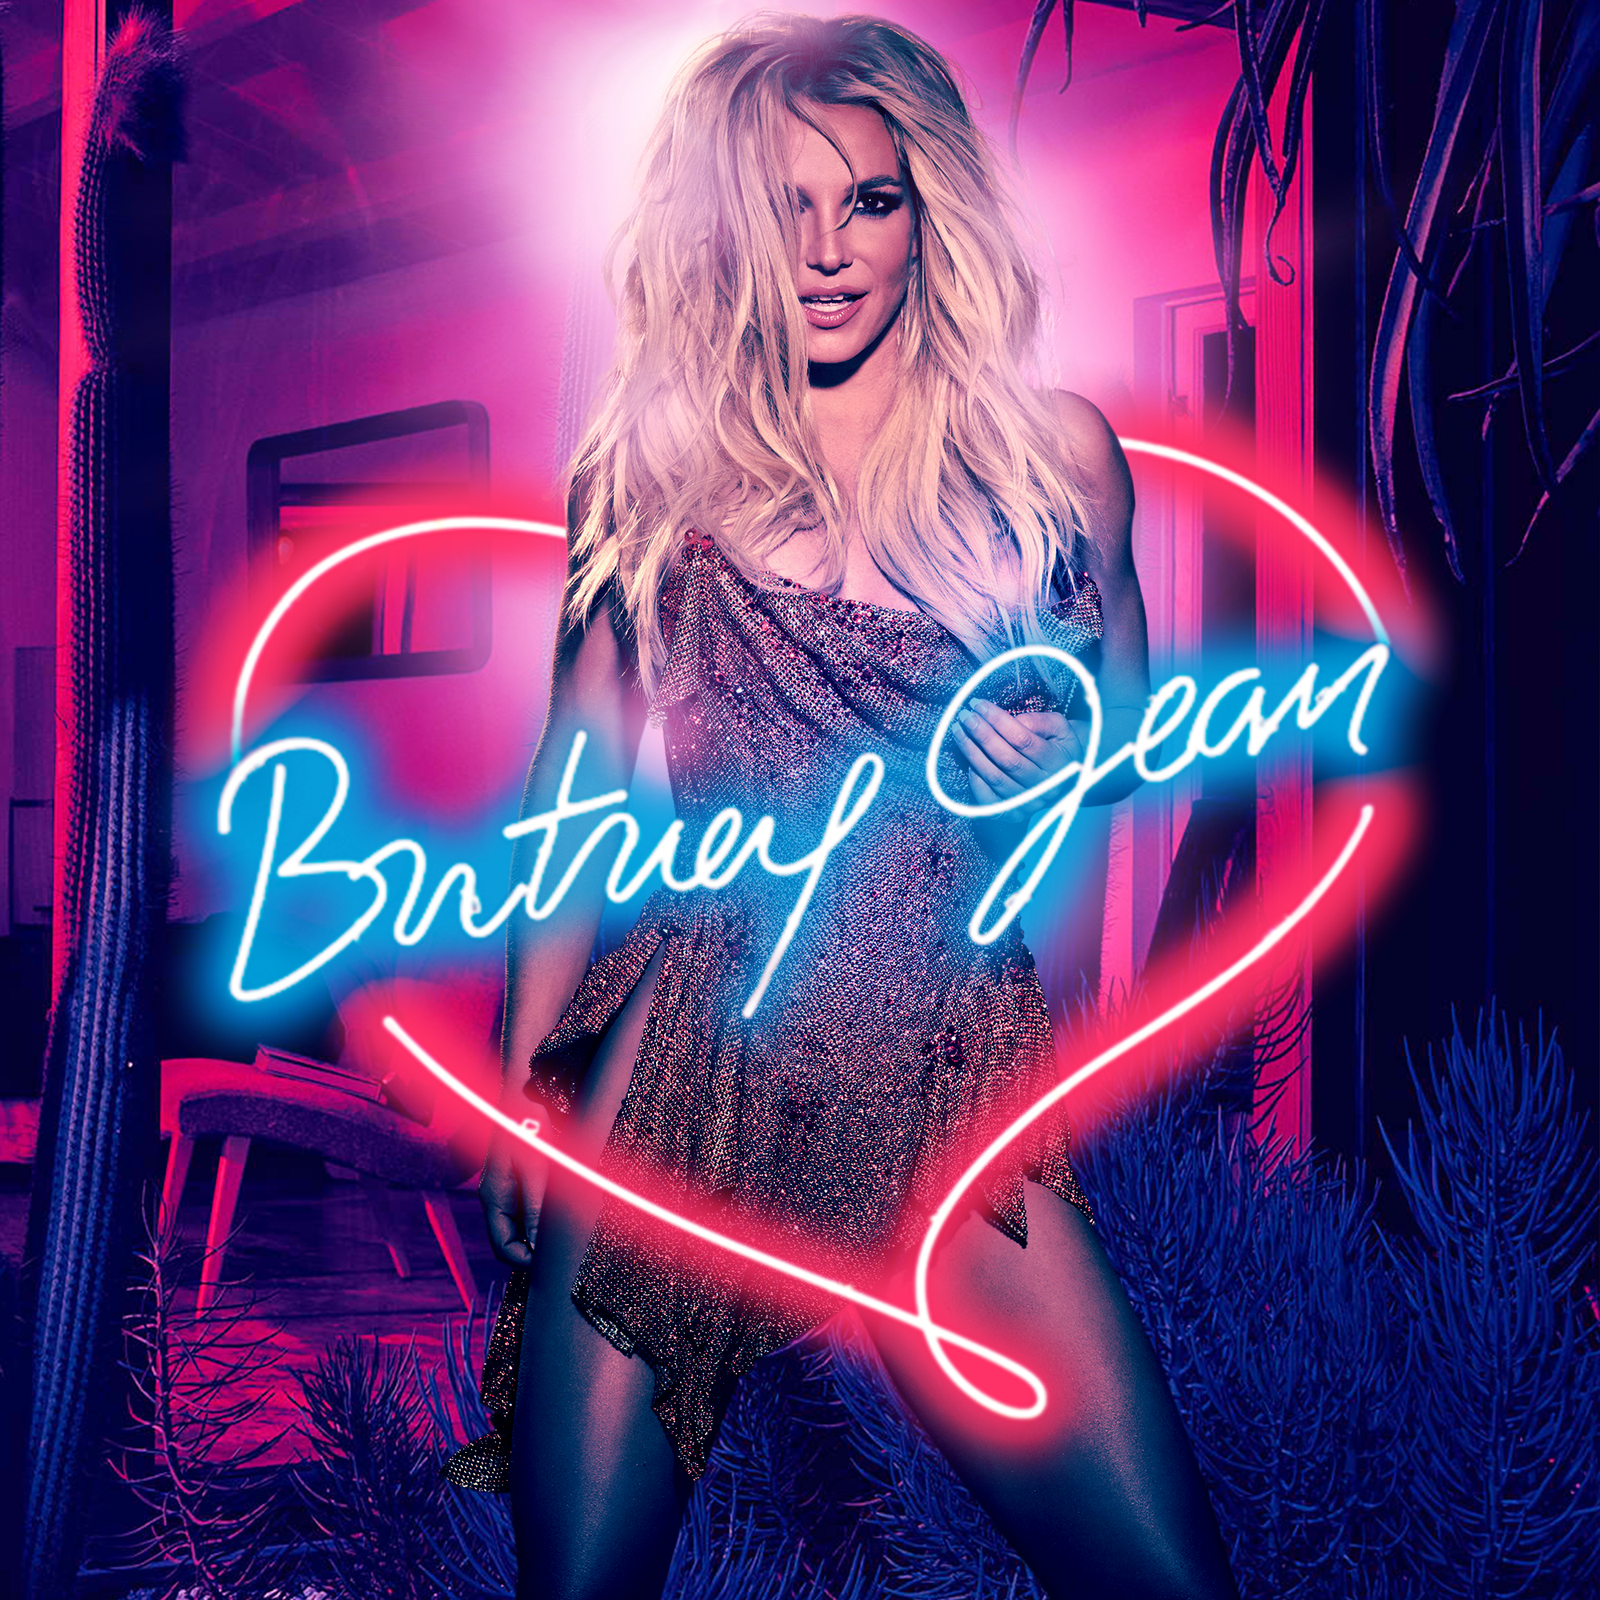 Britney spears has revealed the artwork for her forthcoming album britney j...